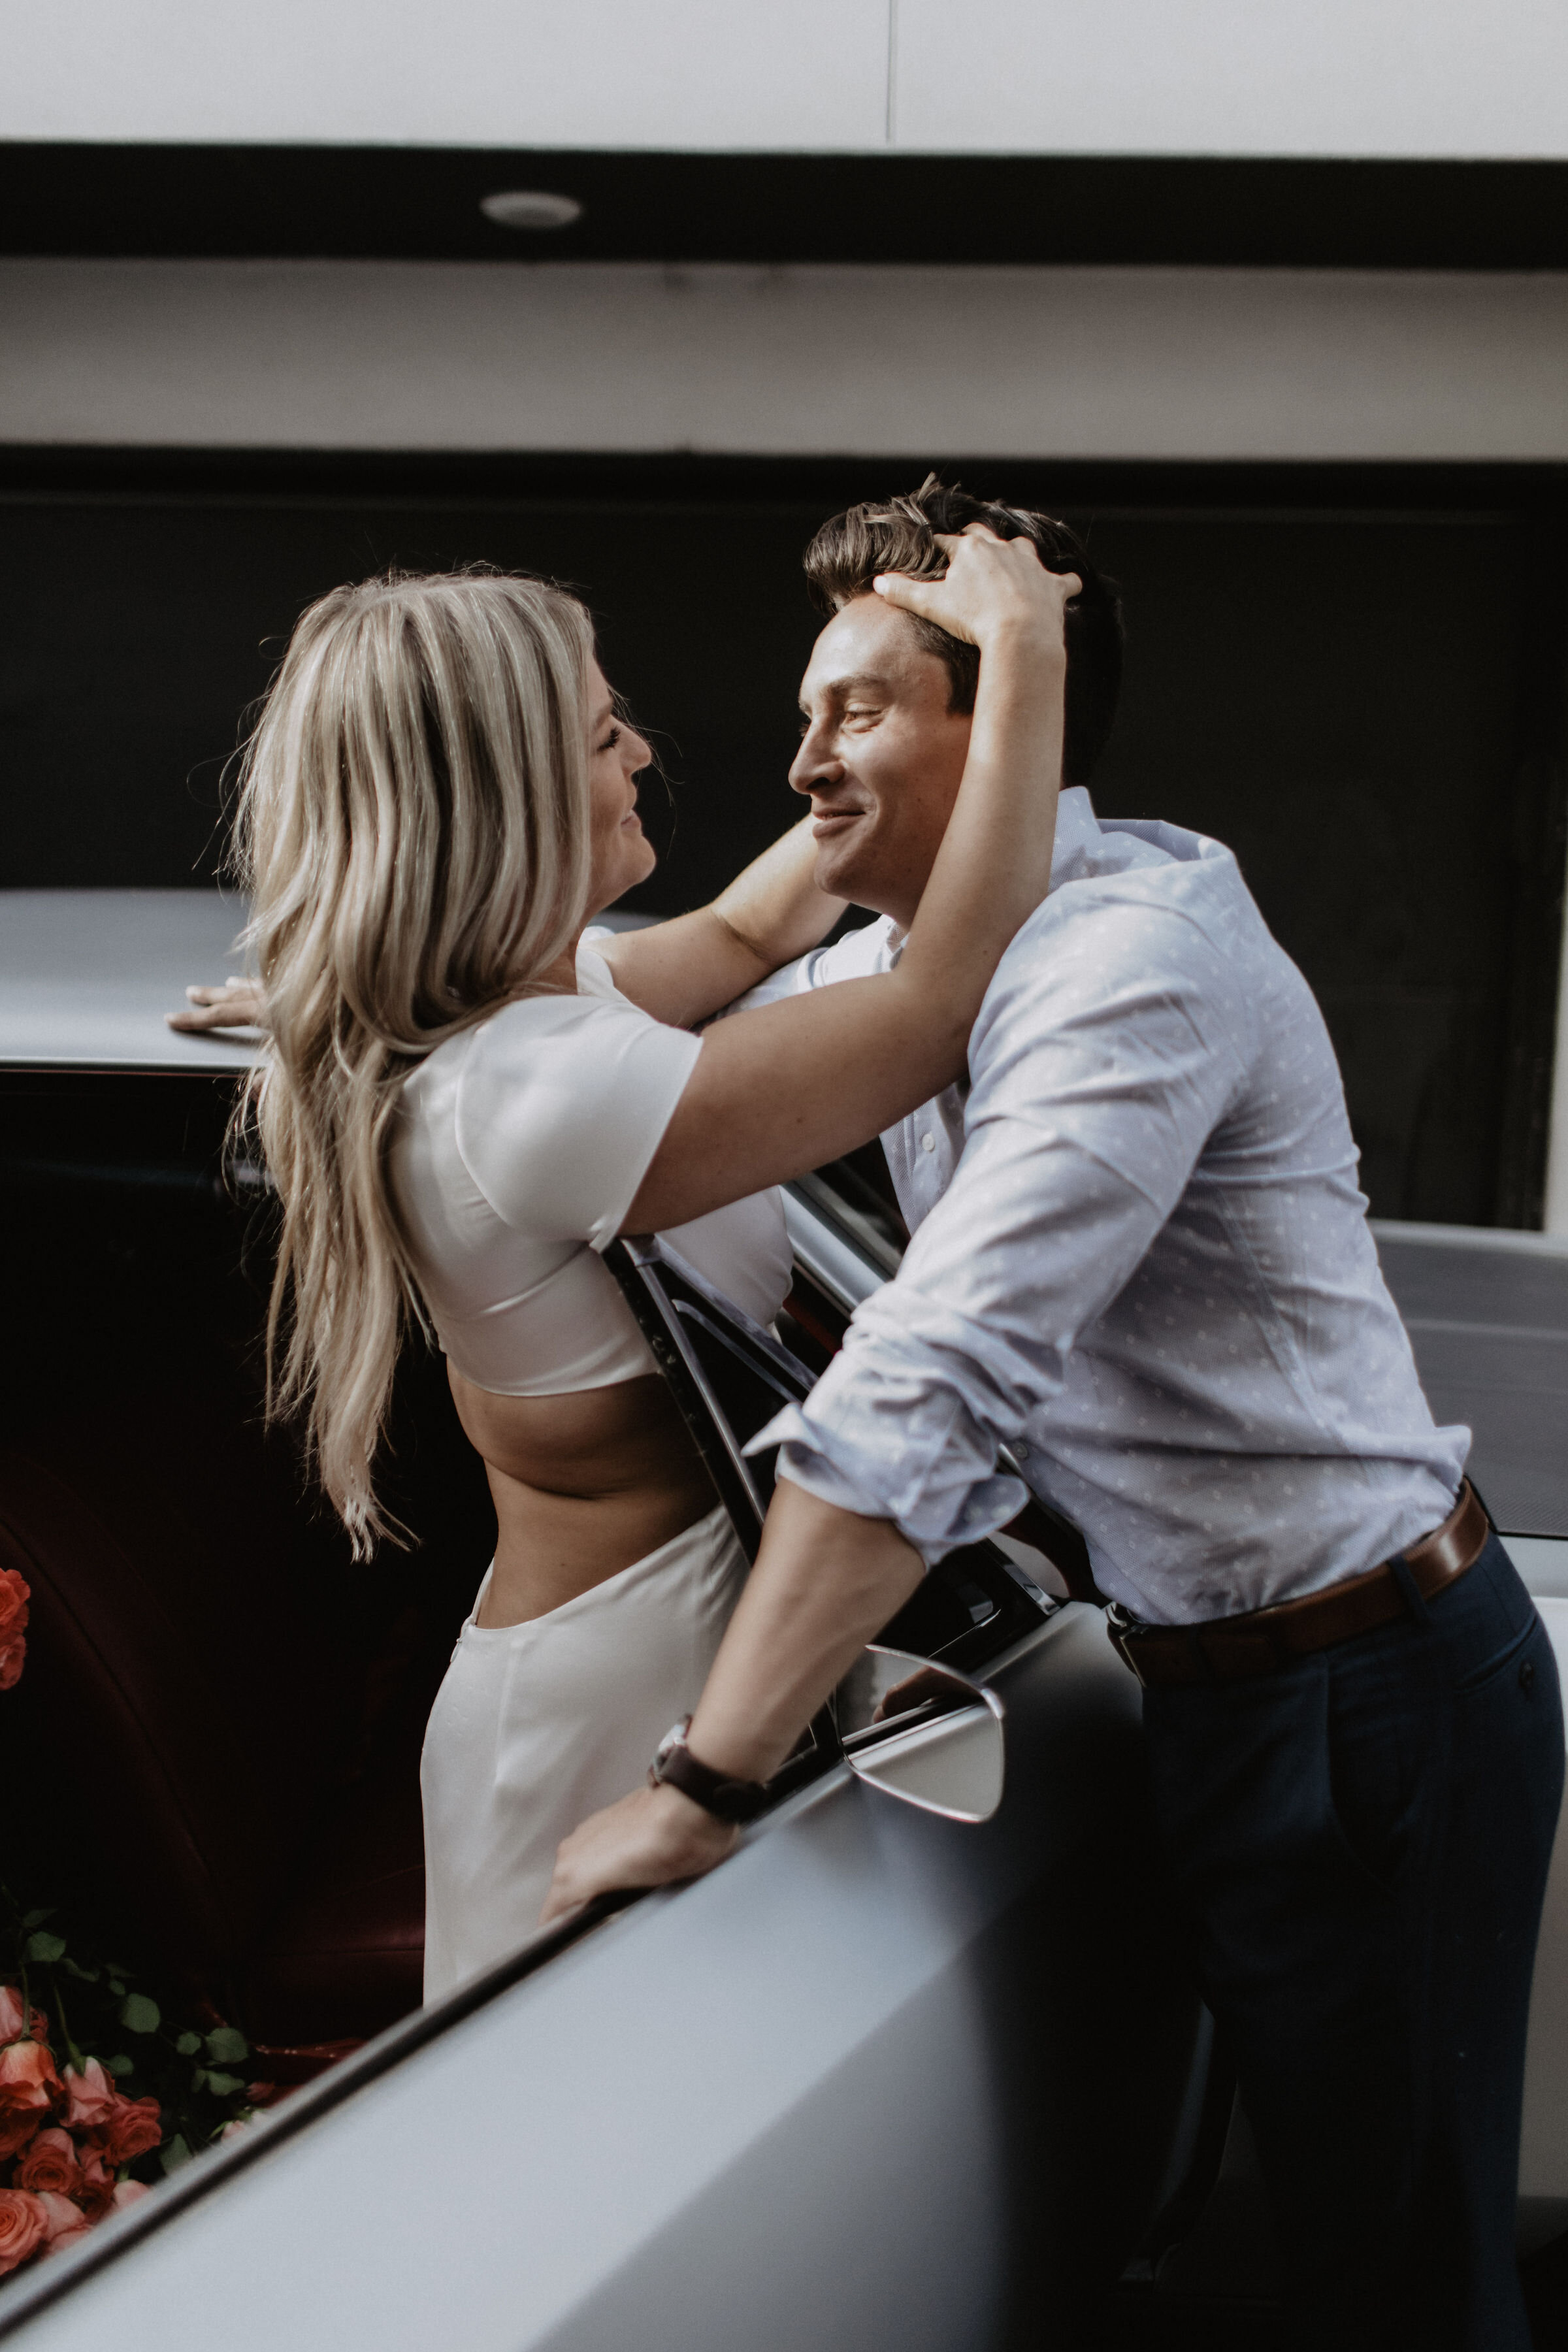  Denver styled wedding shoot with classic muscle cars and red roses in The Label TRINITY wedding dress by a&amp;bé x anna bé bridal shop 